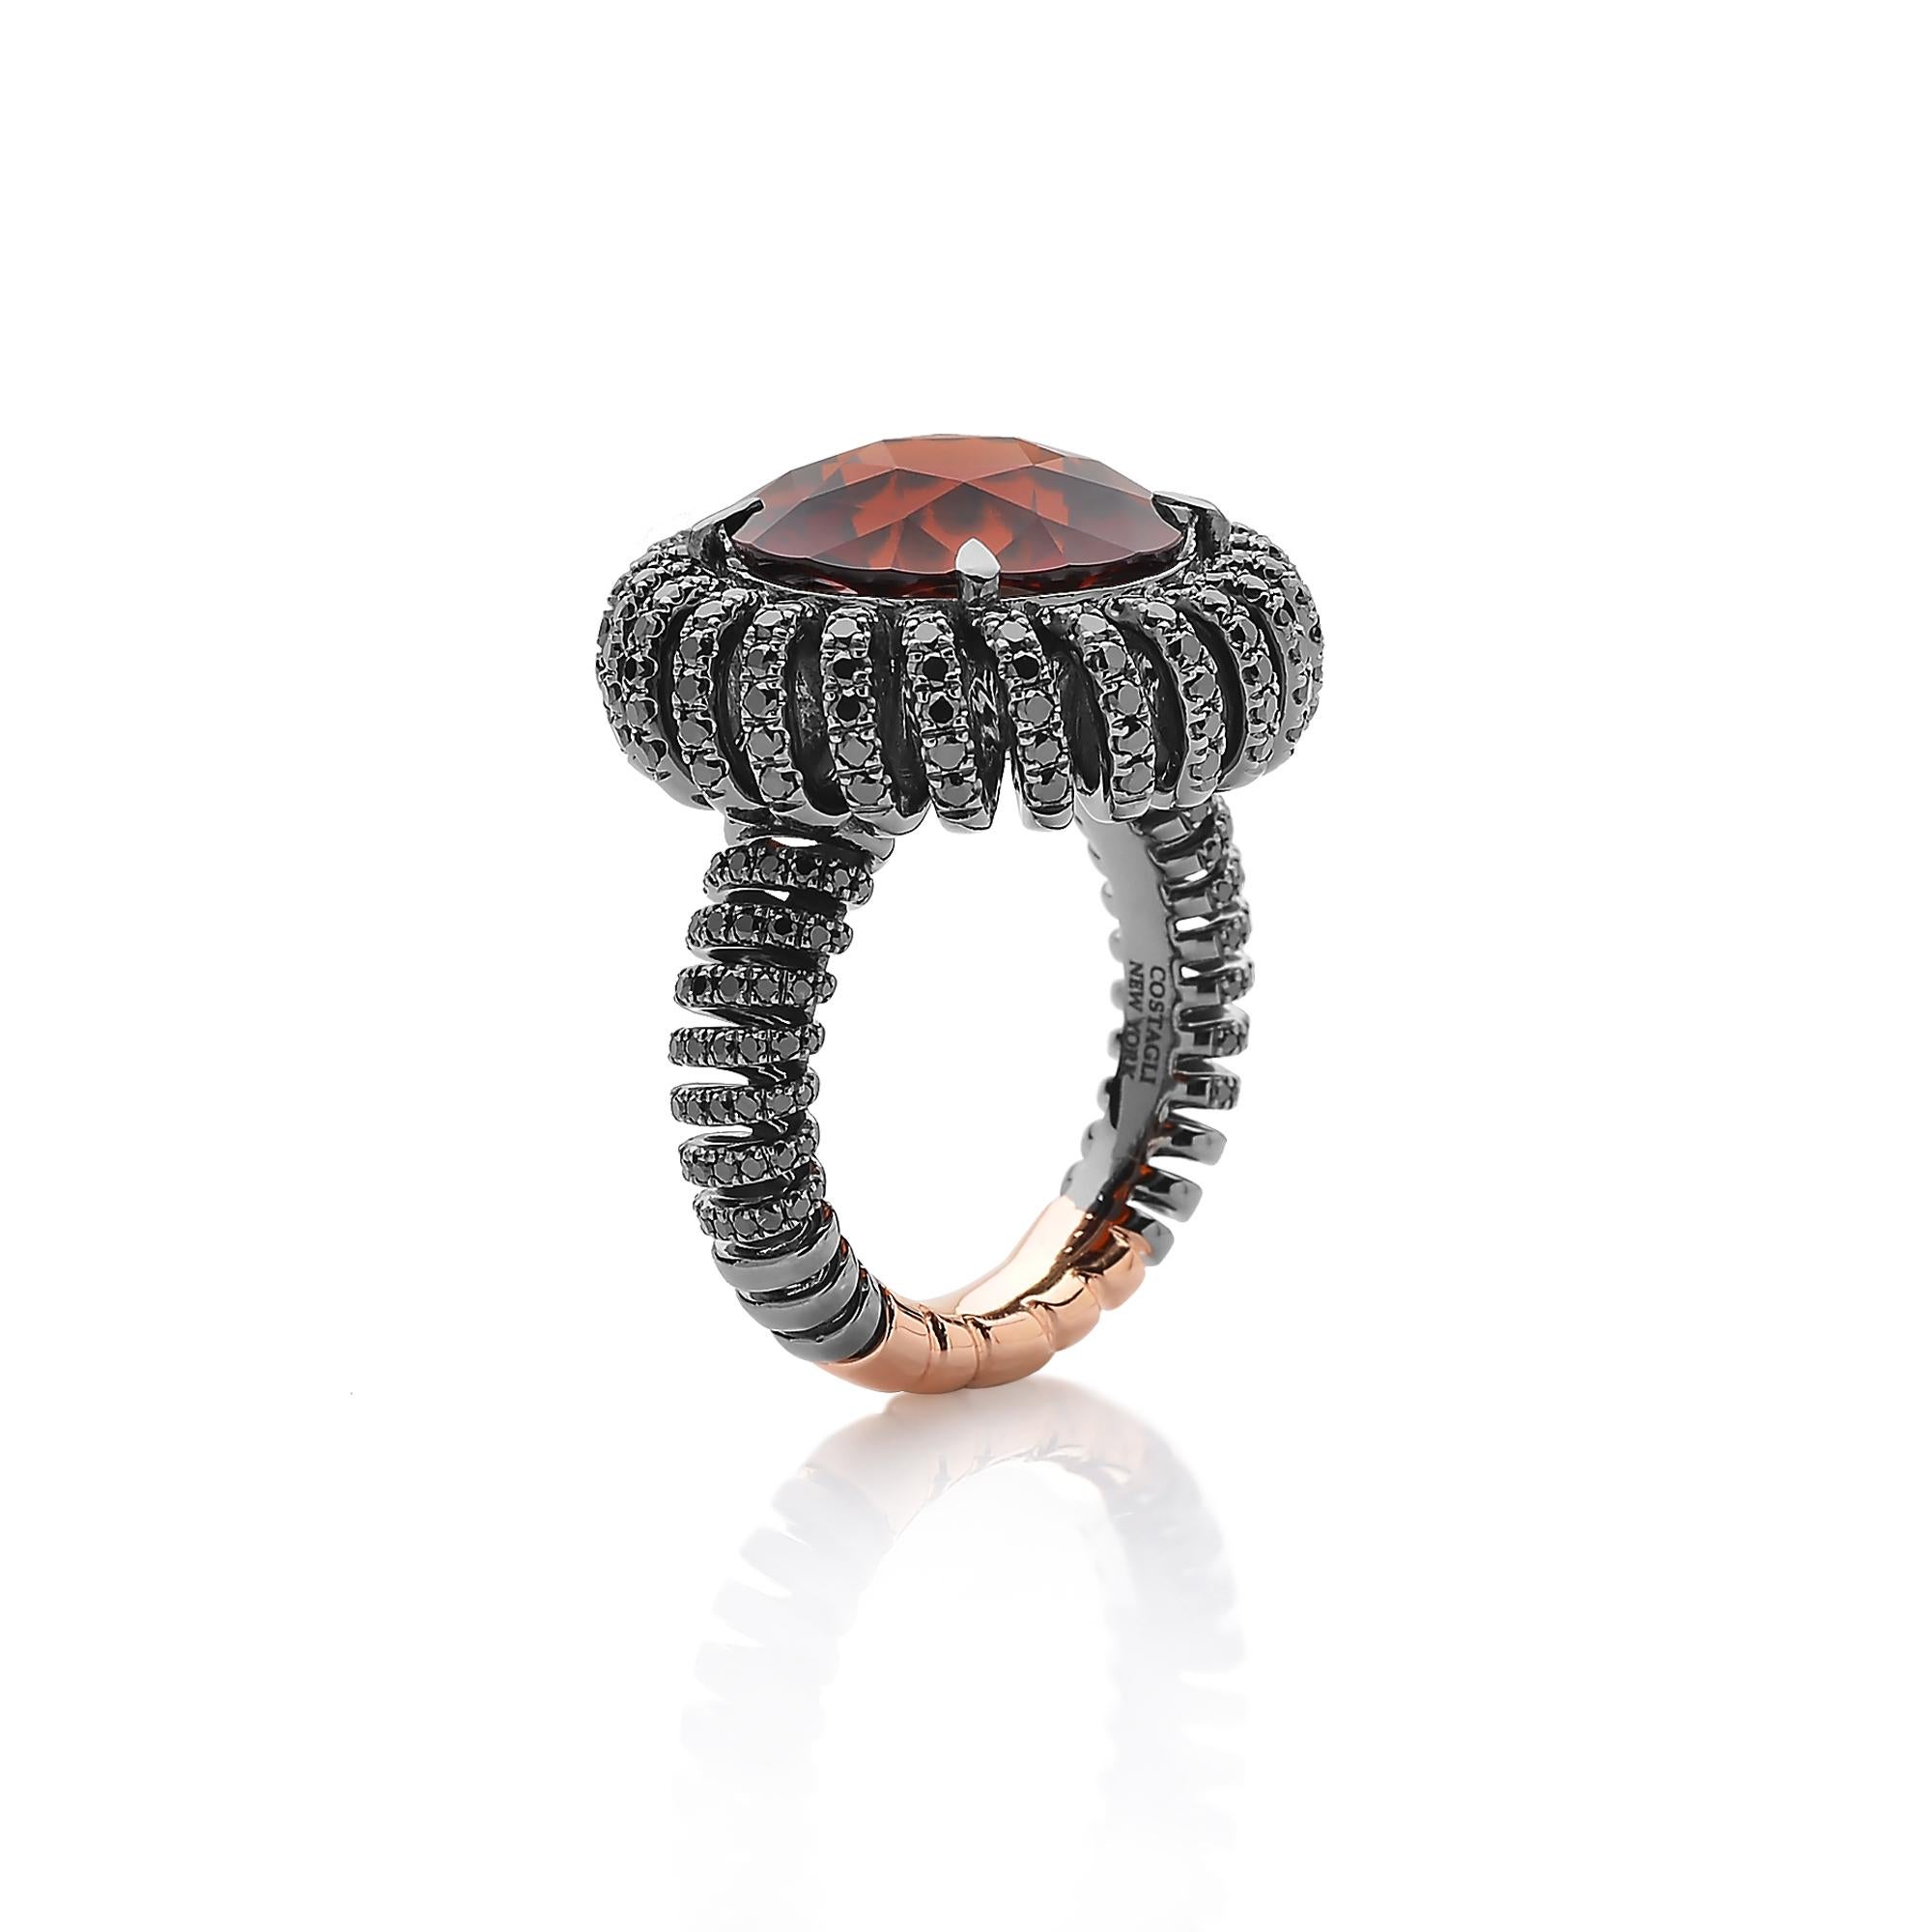 One-of-a-kind hessonite garnet ring set in 18 karat rose gold and white gold with black rhodium finish and pave-set black diamond detailing. 

The beauty is in the details - from the combination of hues, the cut of the gemstones, and the color of